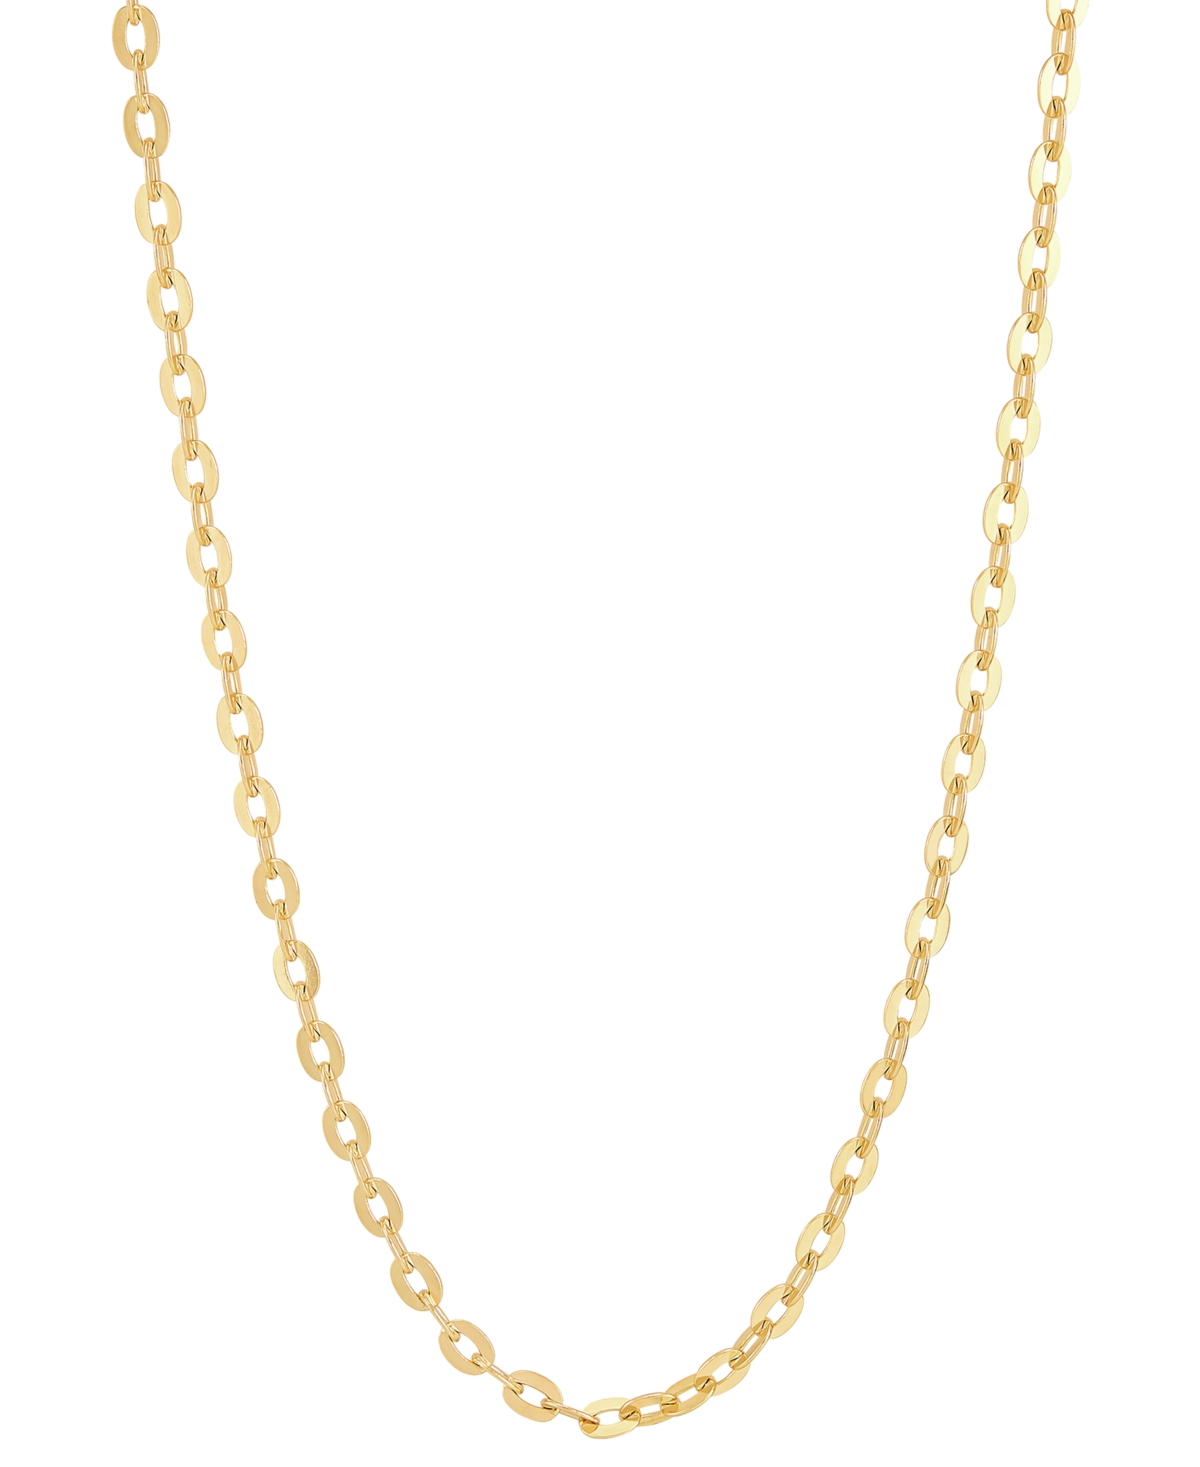 Polished Solid Cable Link 18" Chain Necklace in 14k Gold - Yellow Gold